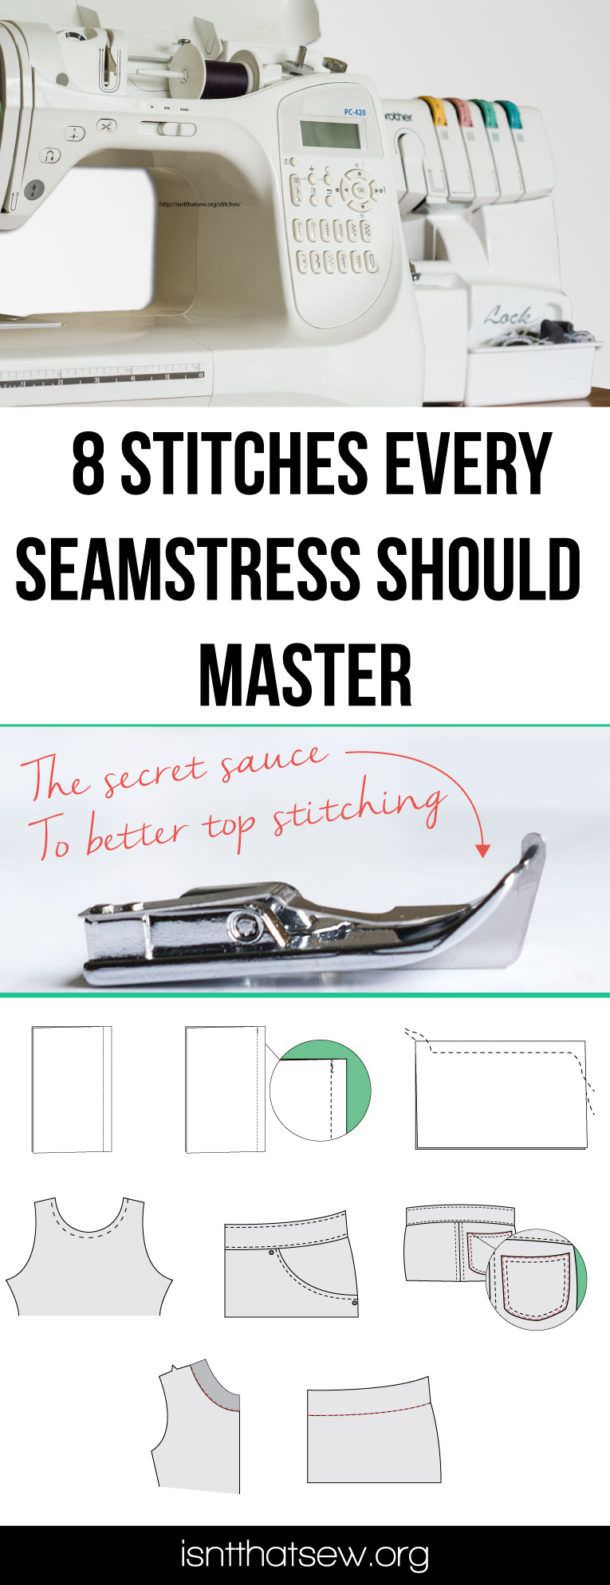 Stitches are an integral part of sewing. If you love stitching, you should master these eight sewing stitches.